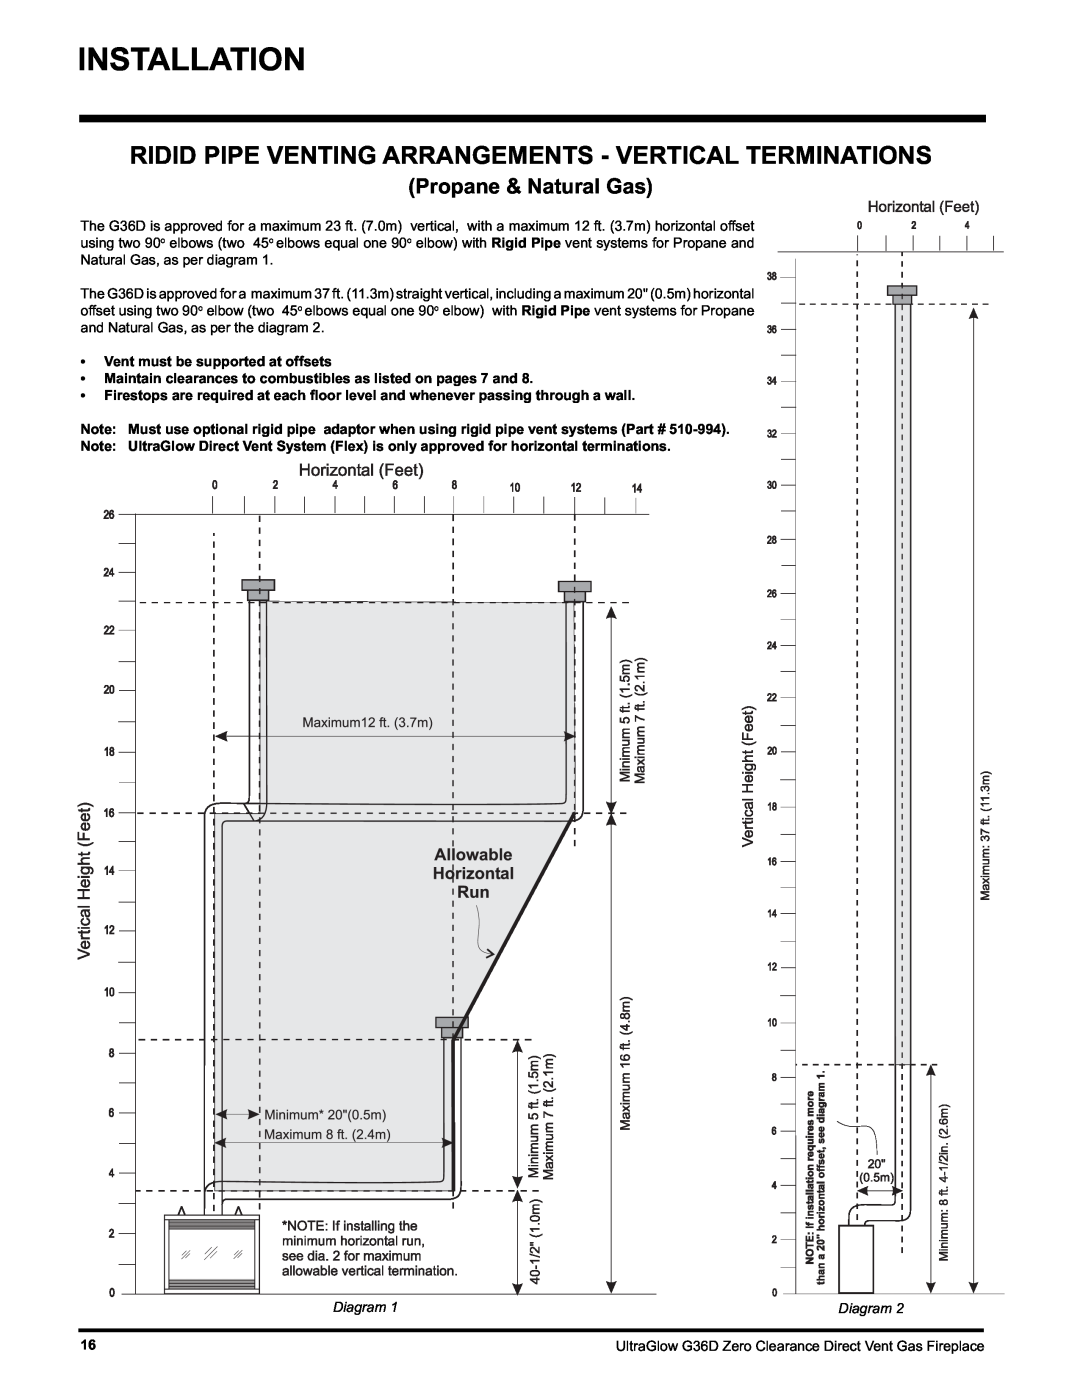 Regency G36D-LP PROPANE installation manual Installation, Propane & Natural Gas, Vent must be supported at offsets, Diagram 